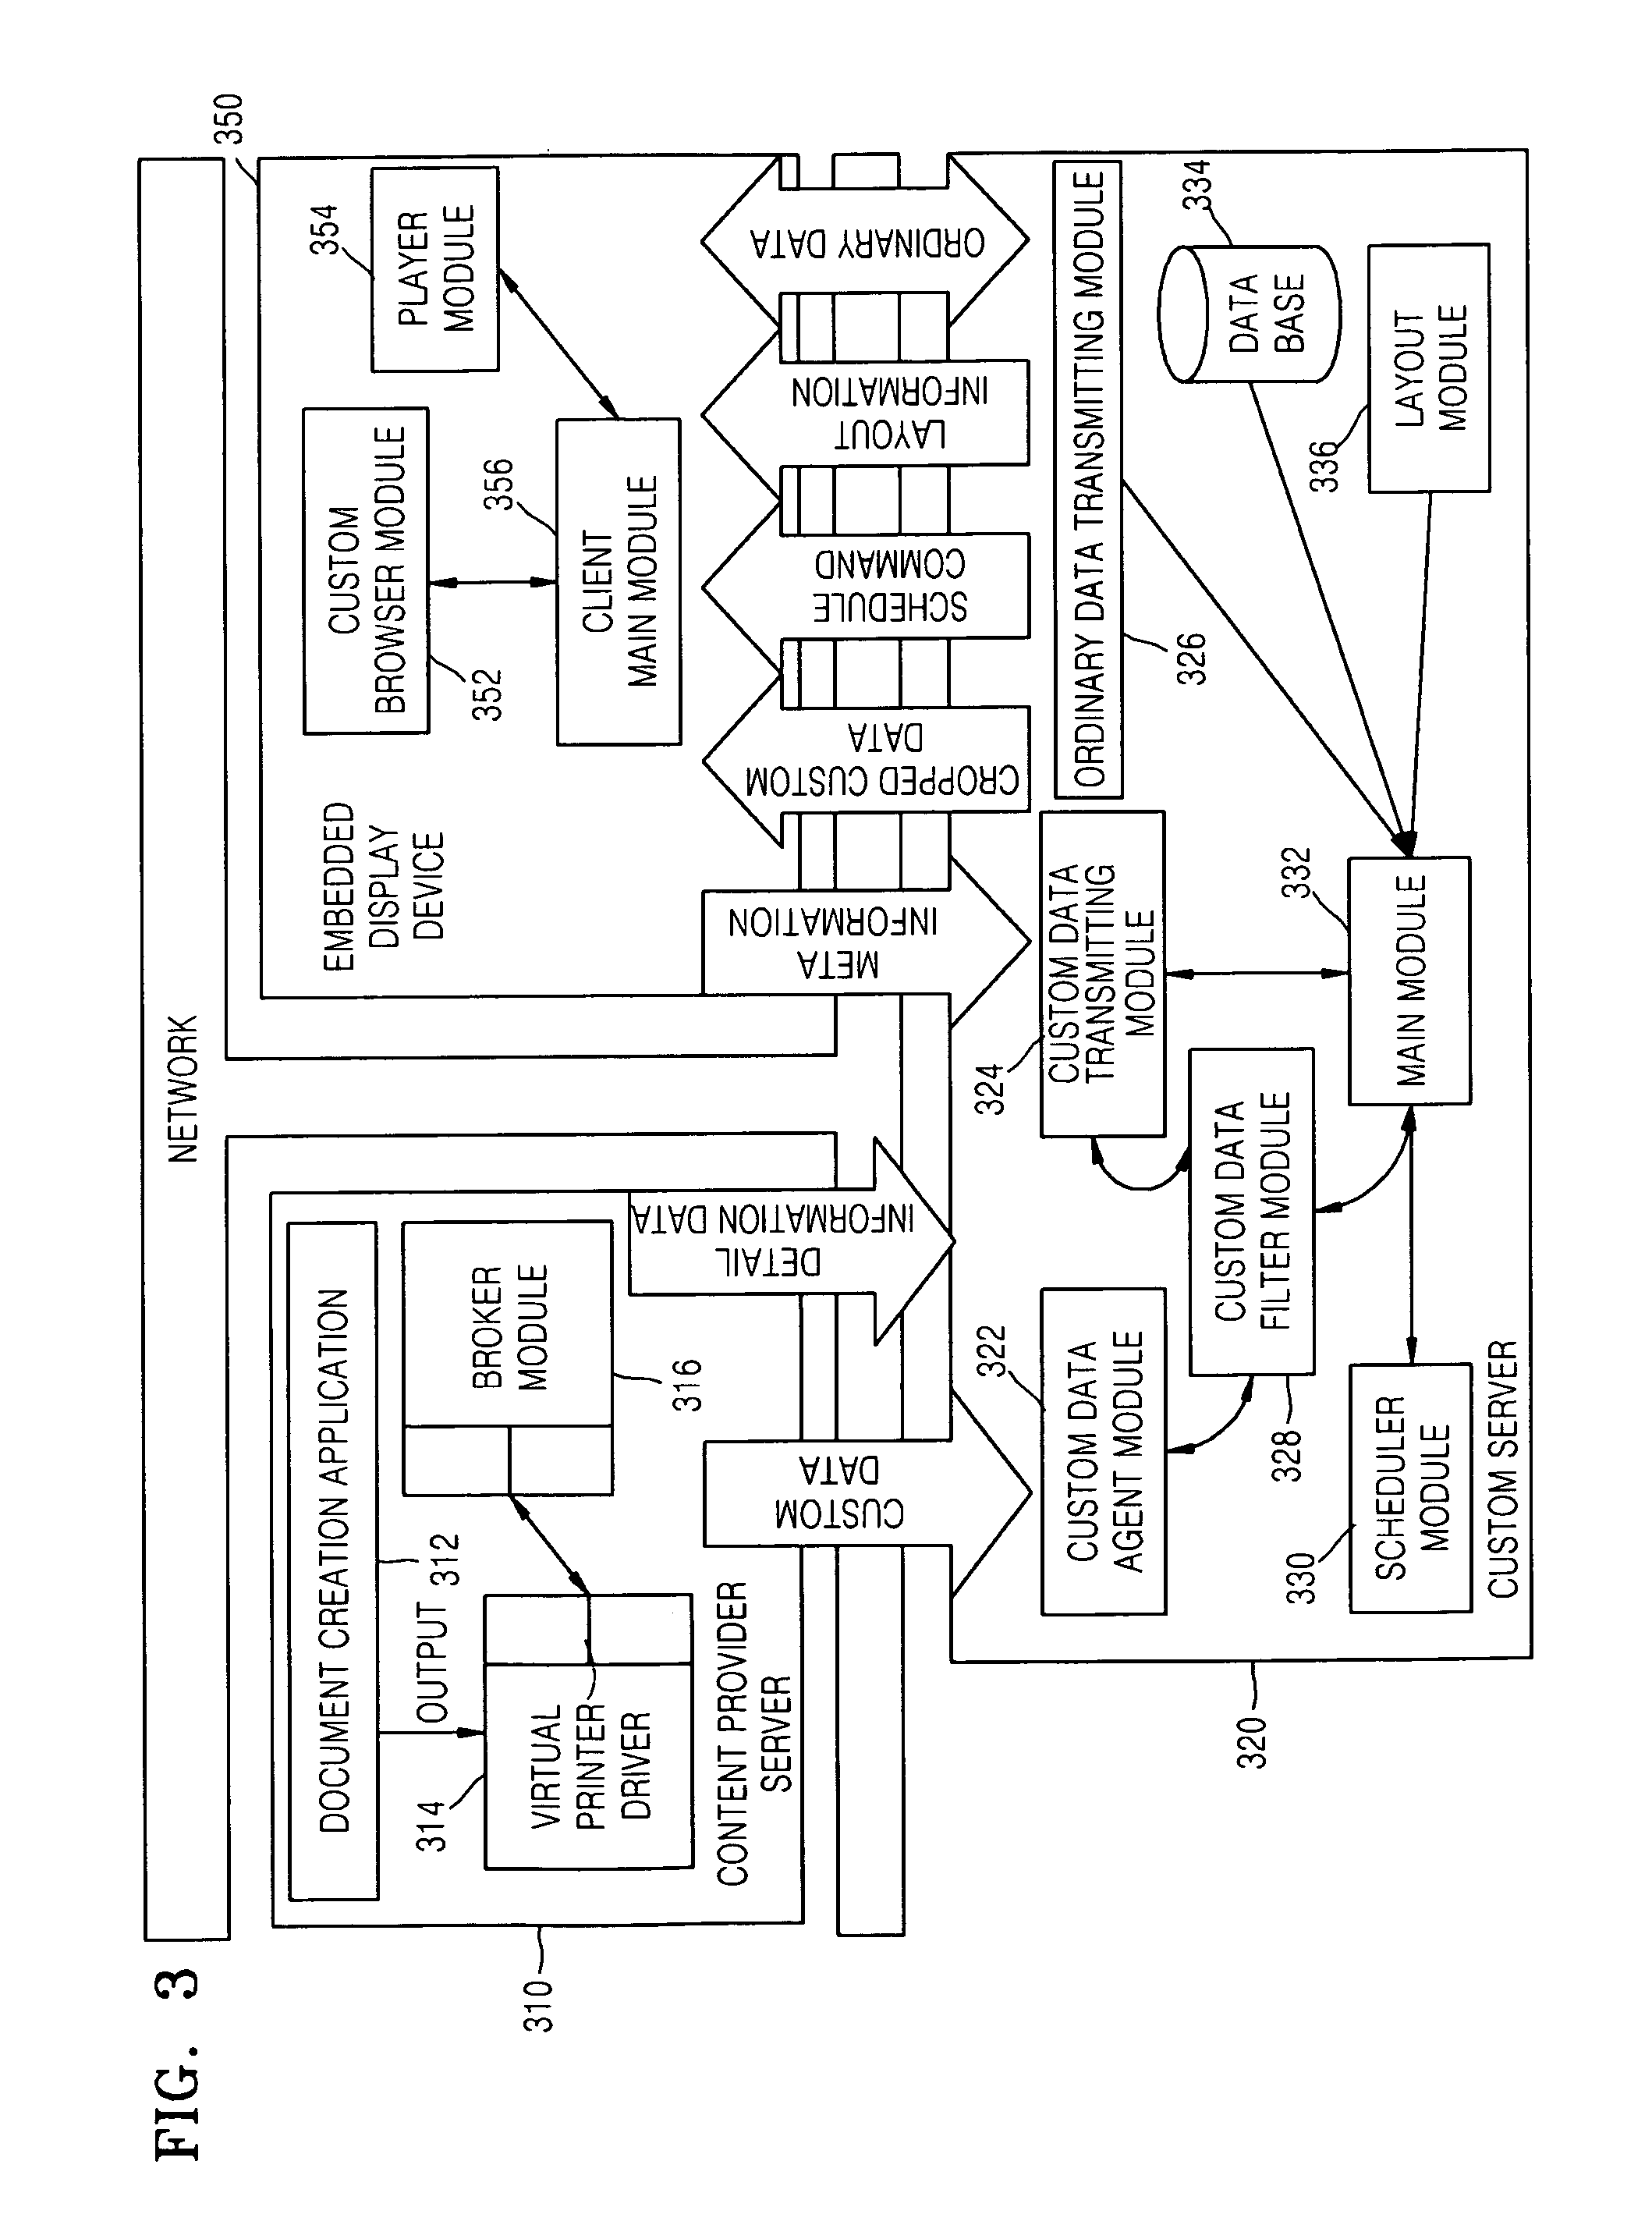 Embedded display system and method used by the system